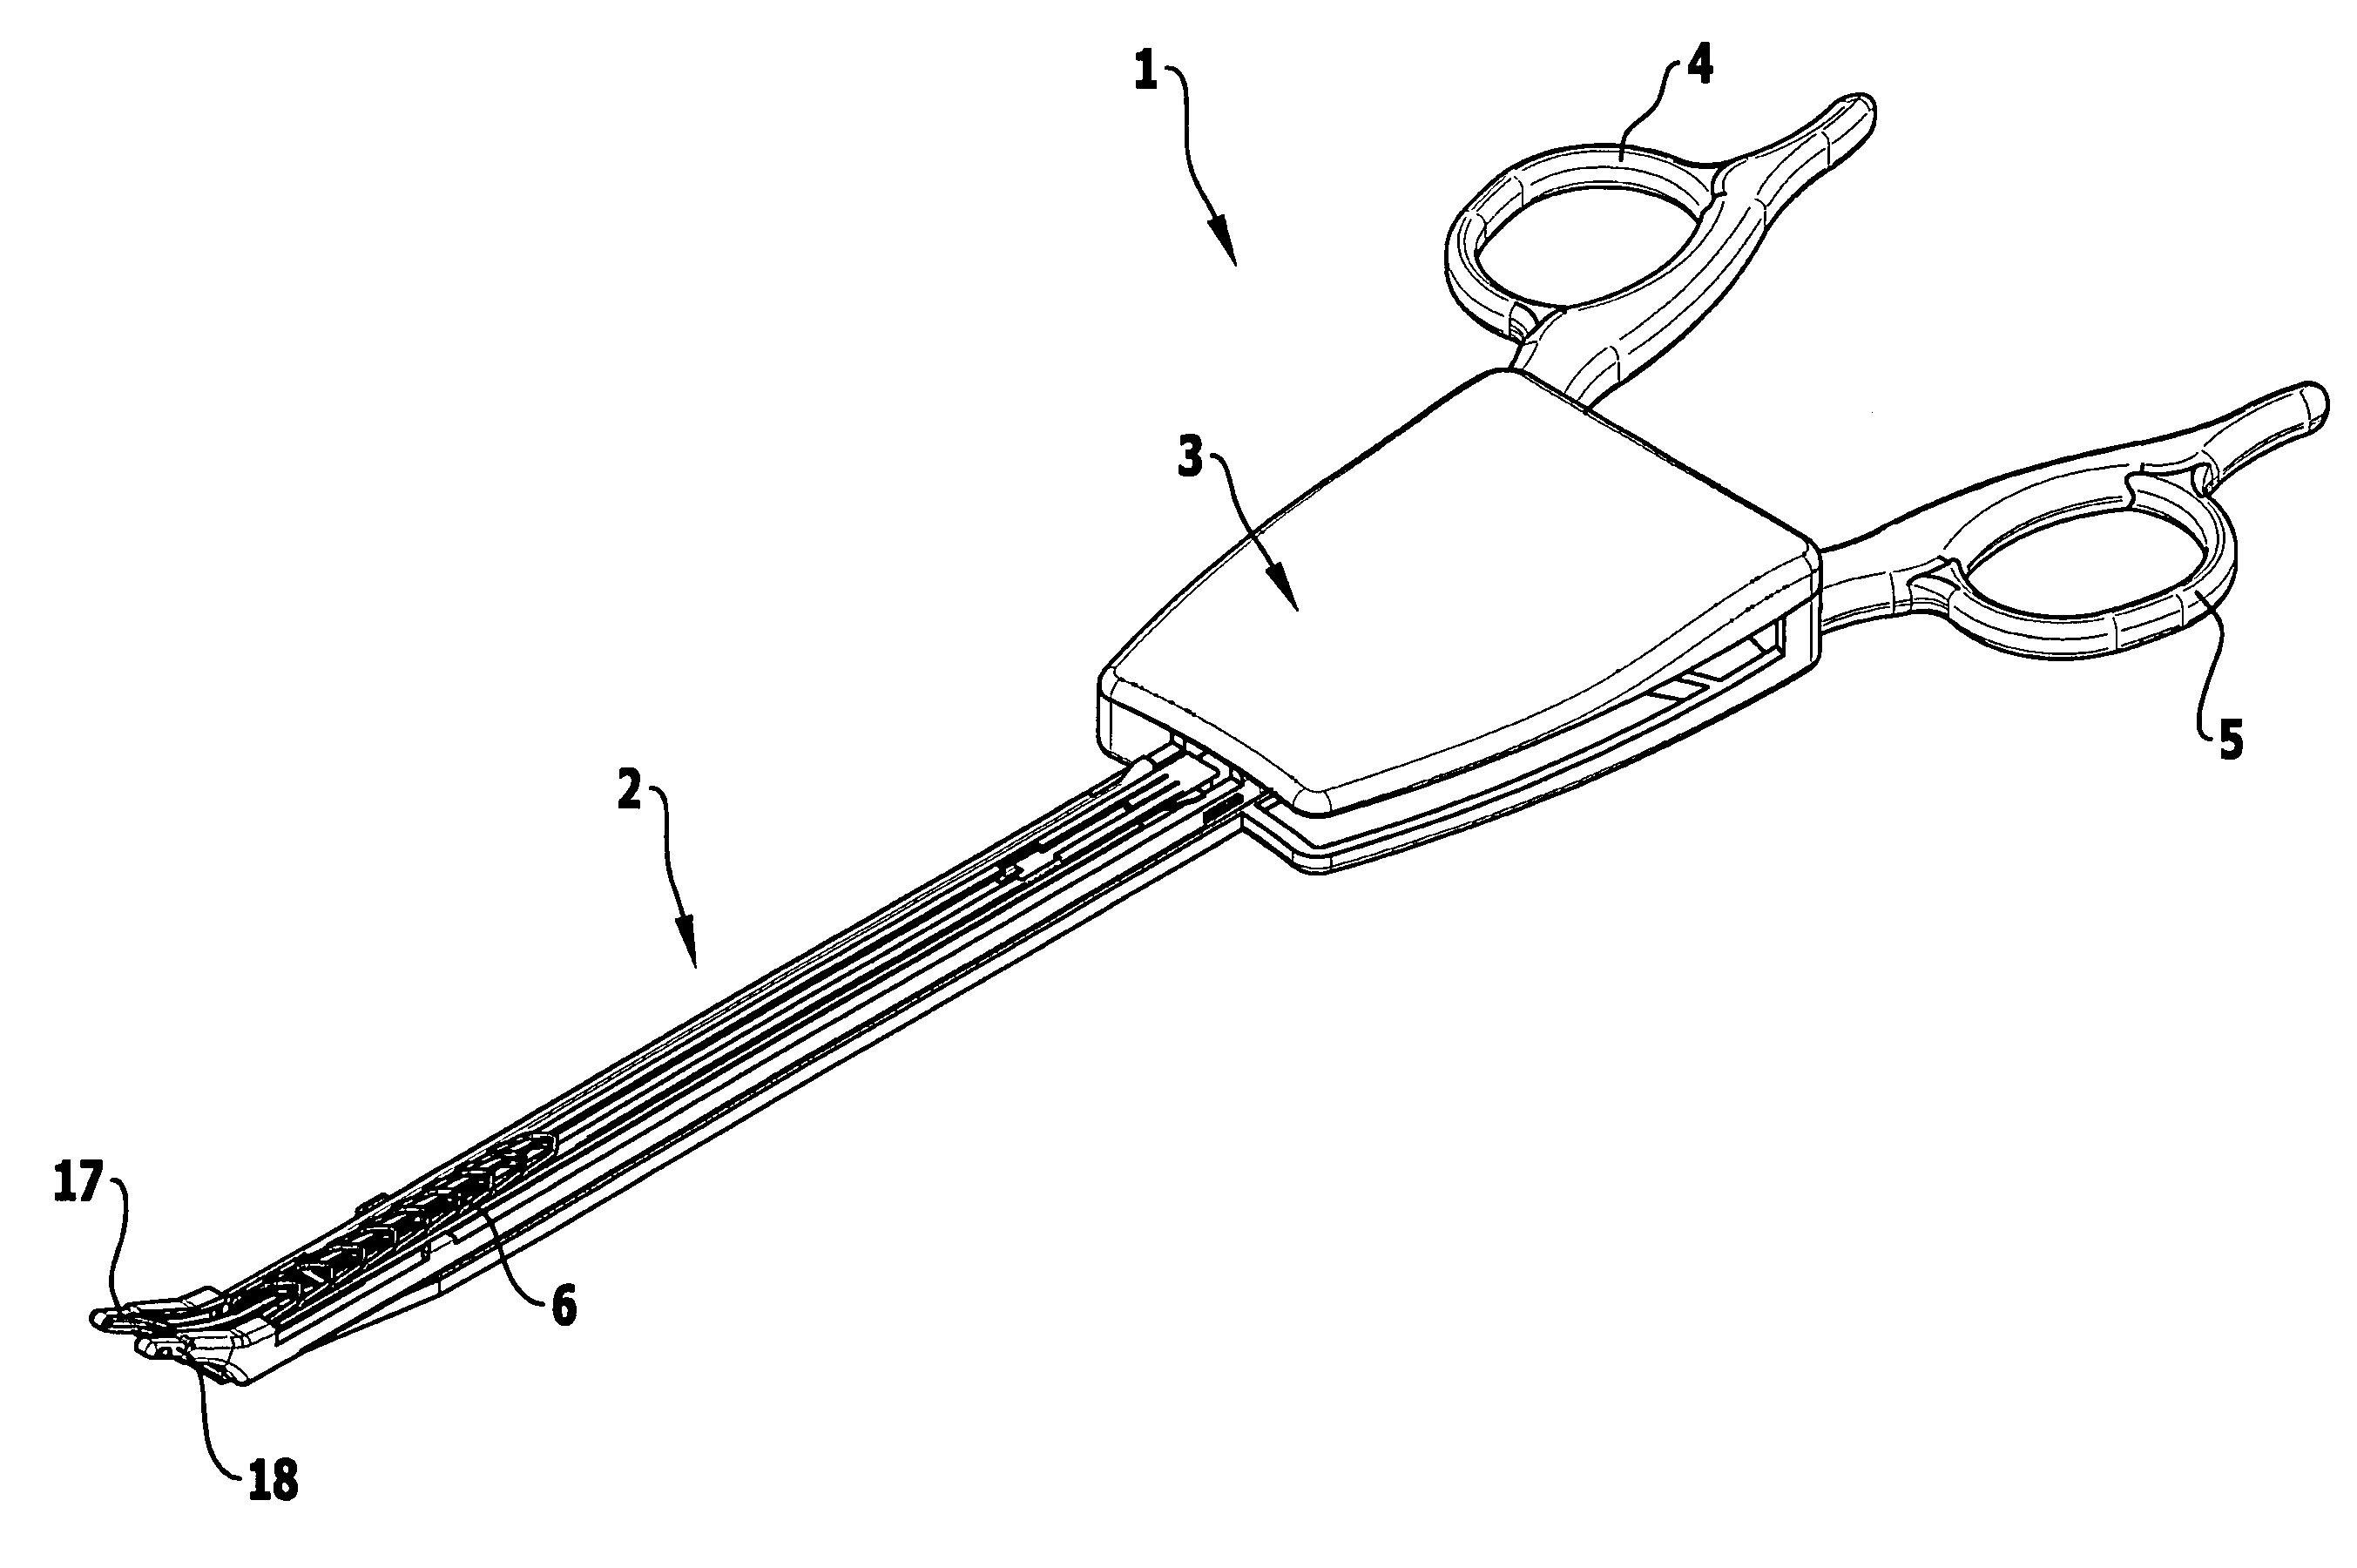 Surgical instrument for the placement of ligature clips